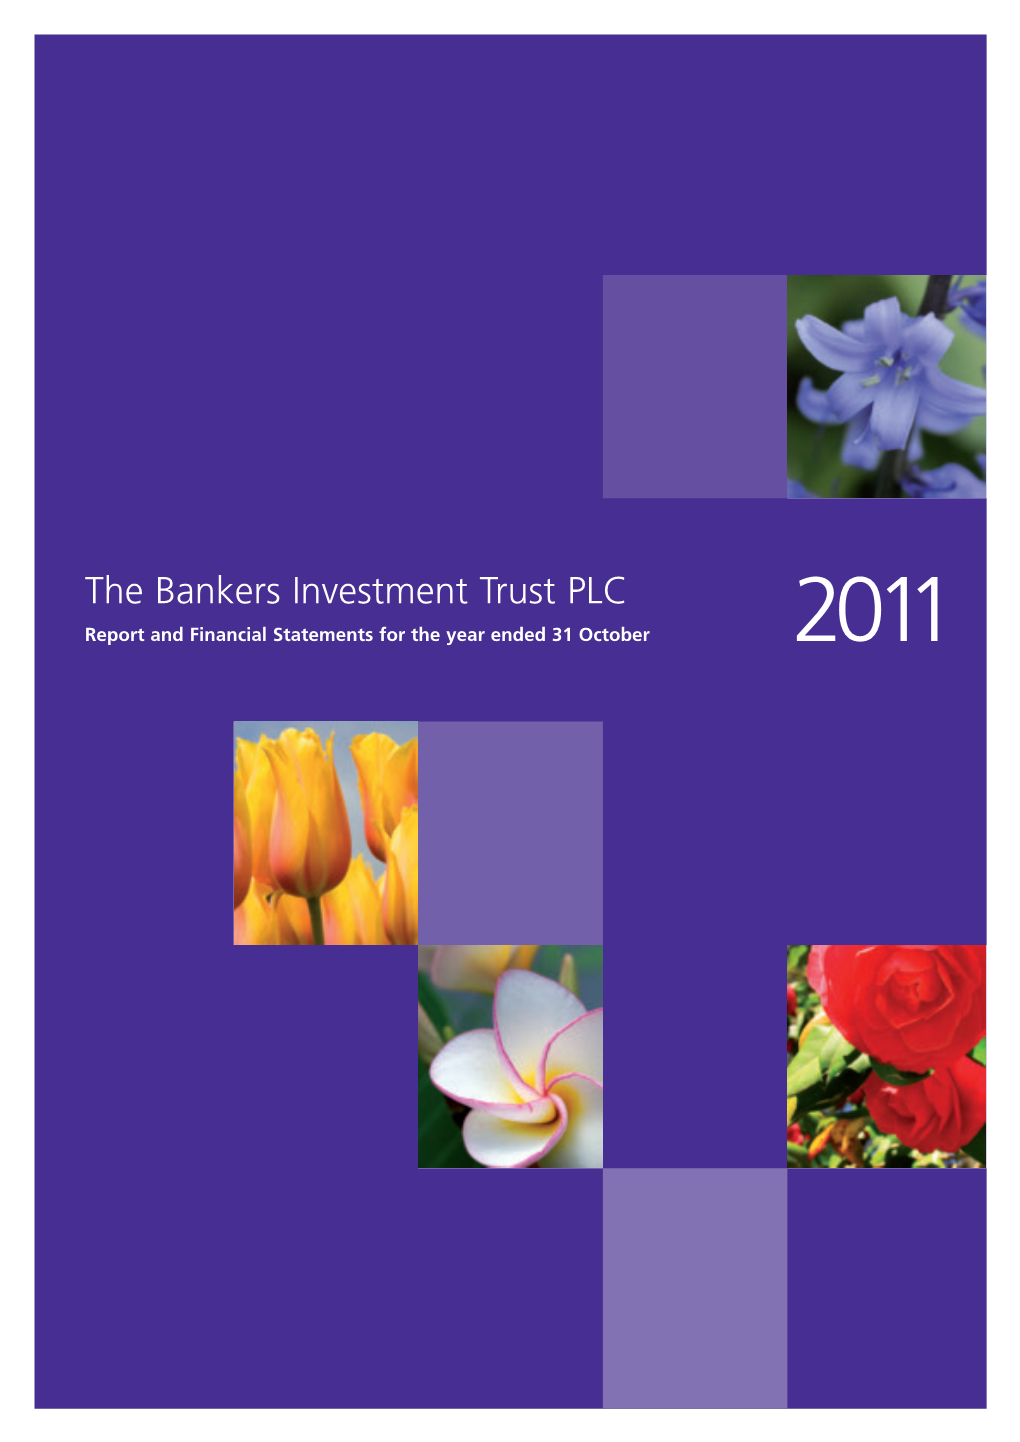 The Bankers Investment Trust PLC – Report and Financial Statements for the Year Ended 31 October